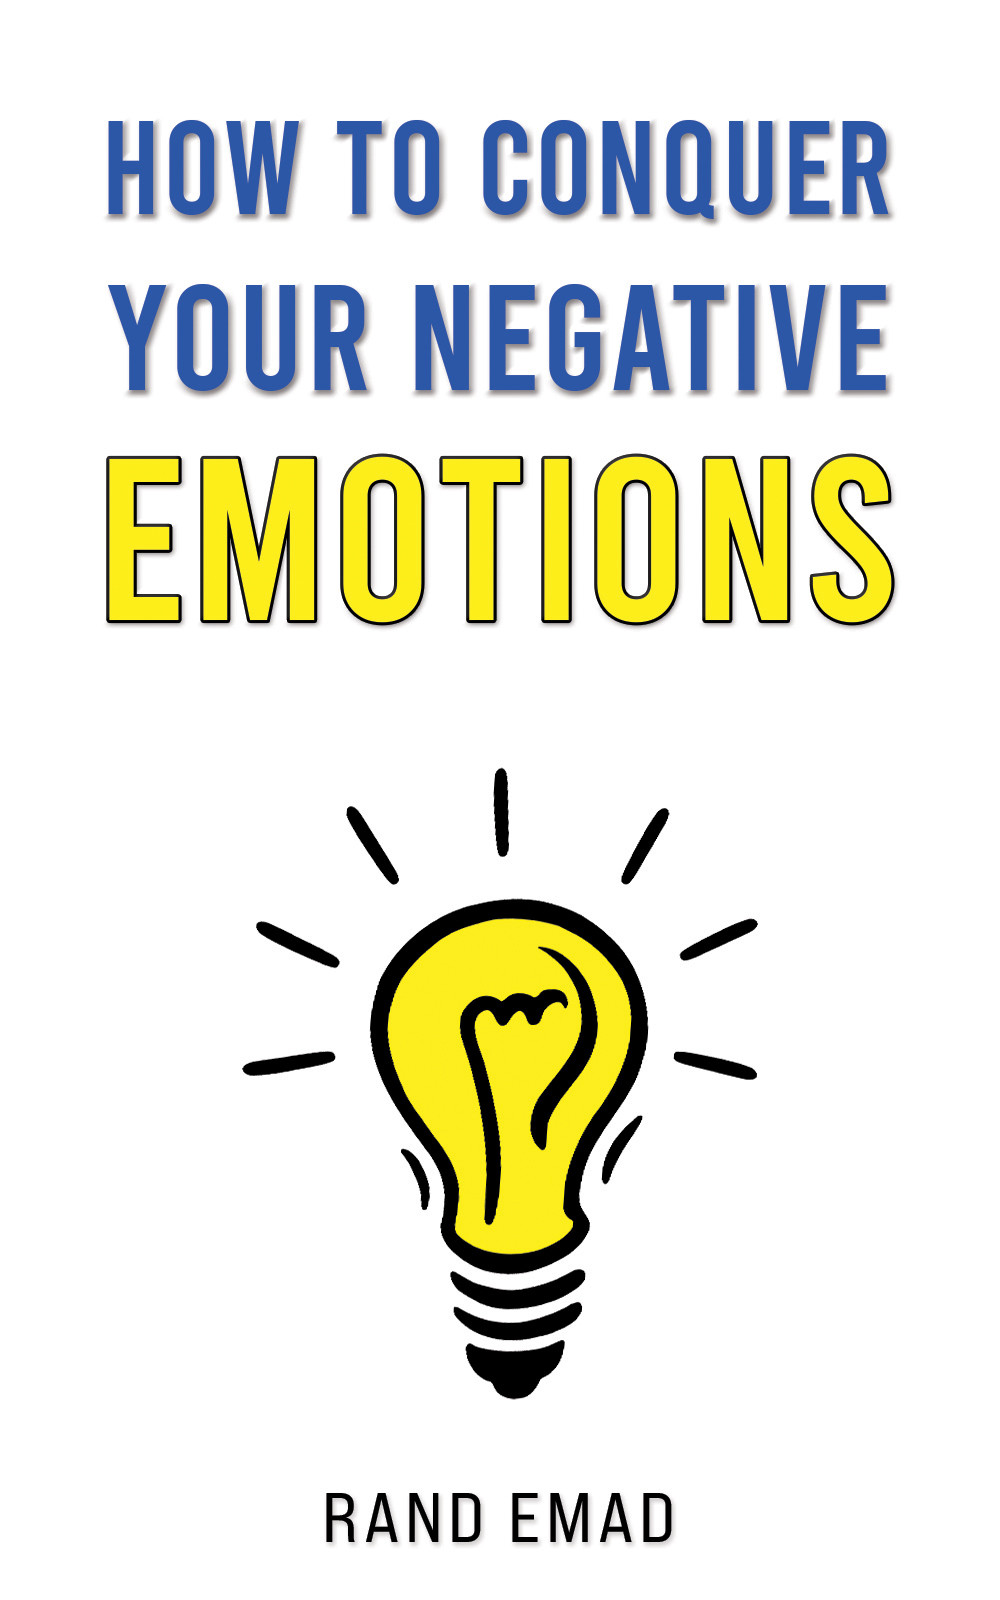 How to Conquer Your Negative Emotions